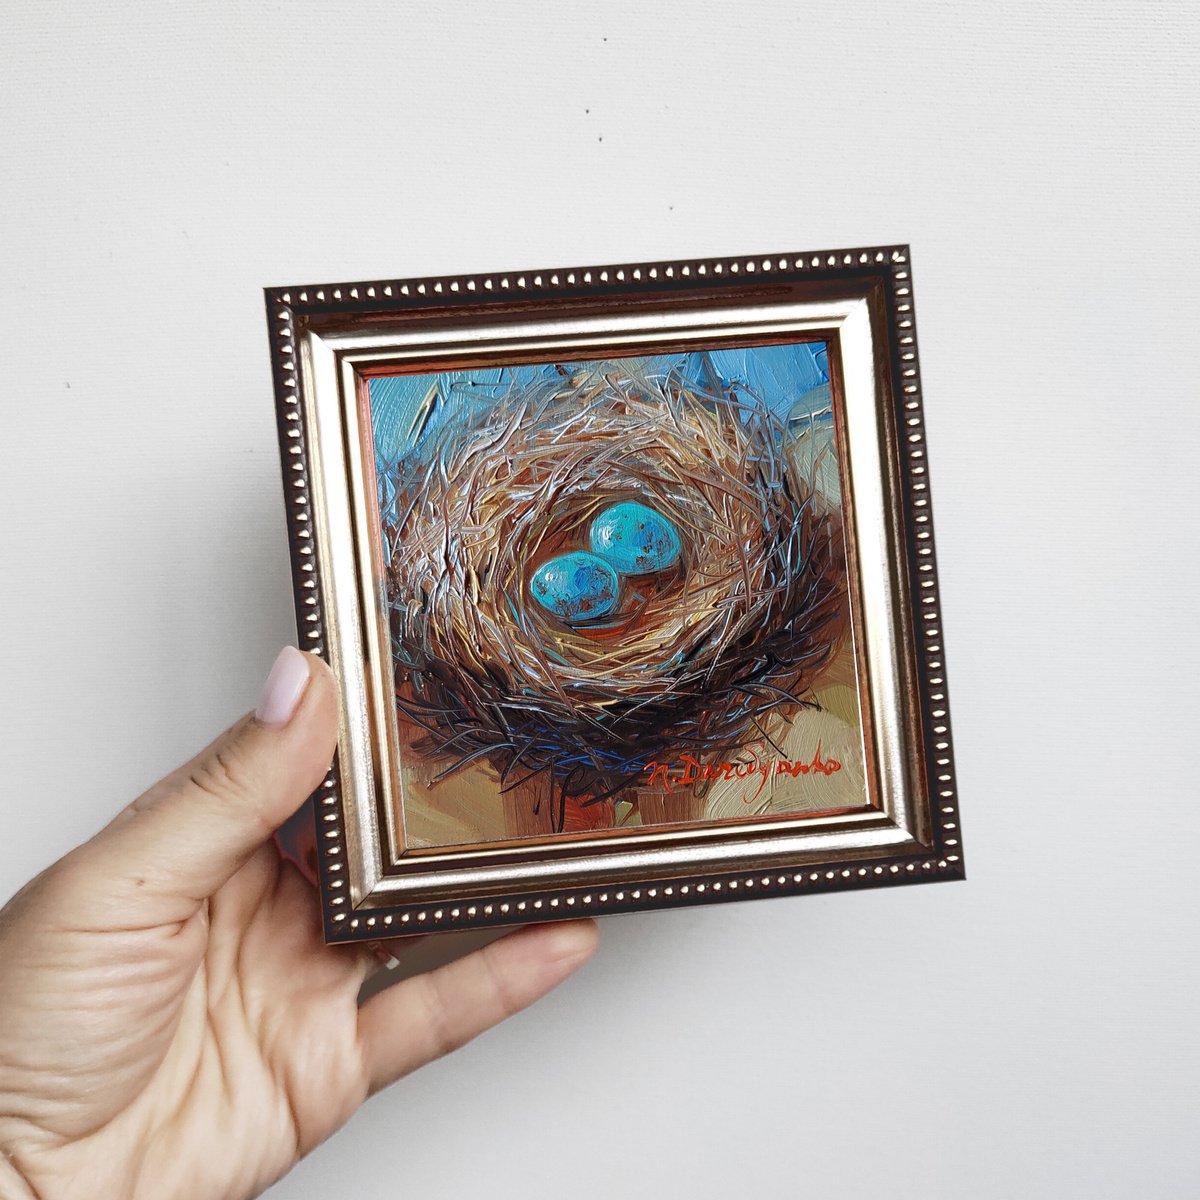 Nest oil painting original 4x4 in frame, Two blu bird egg miniature oil painting wall art... by Nataly Derevyanko